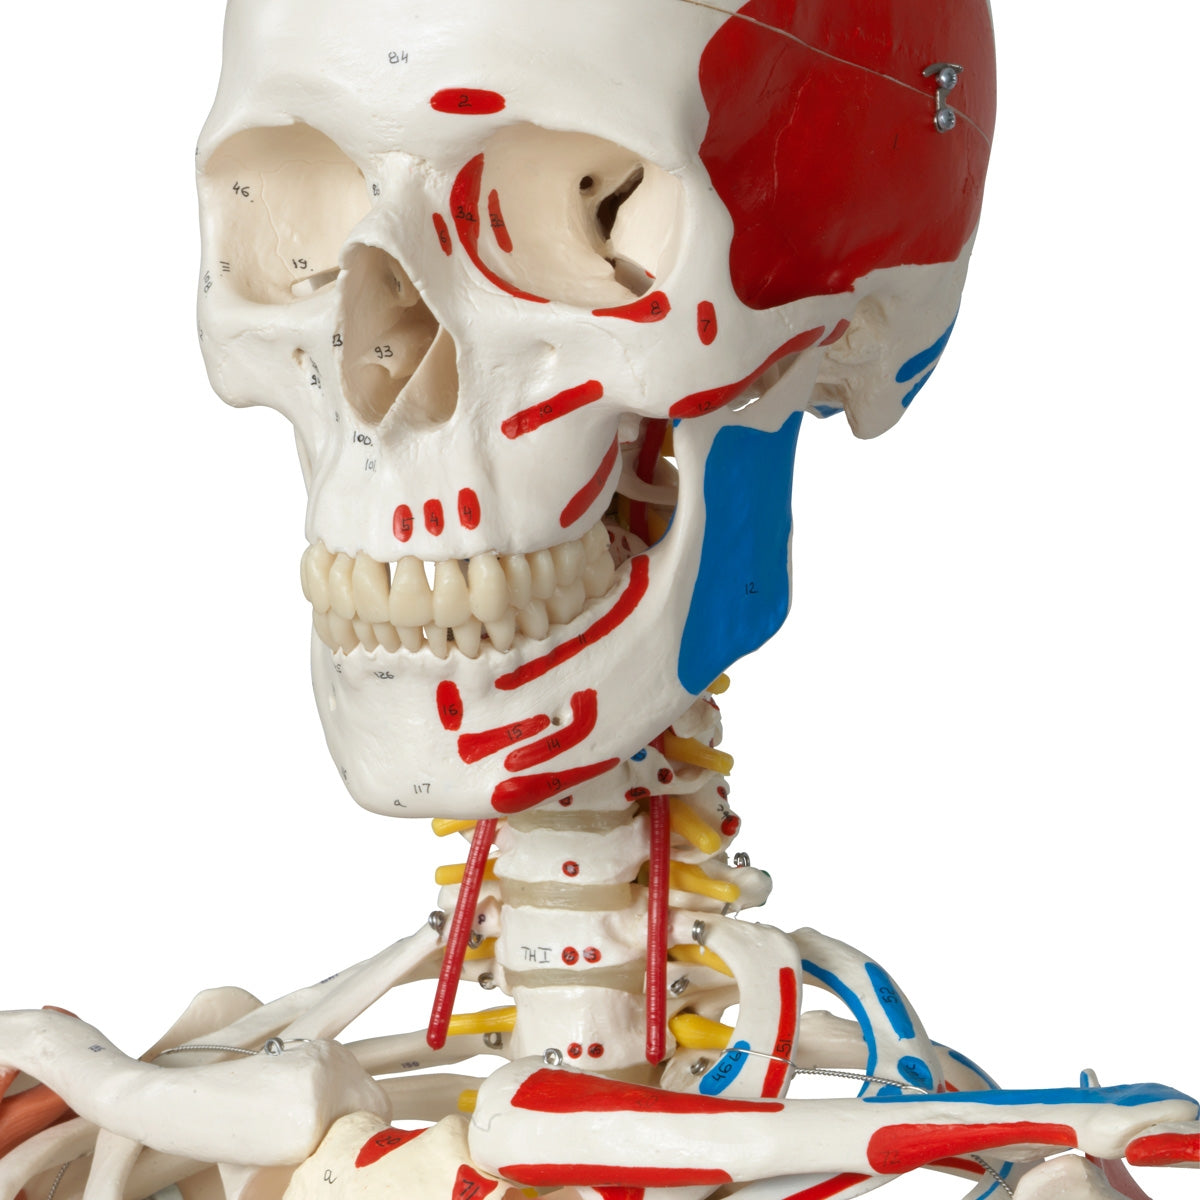 Human Skeleton Model Sam on Hanging Stand with Muscle & Ligaments